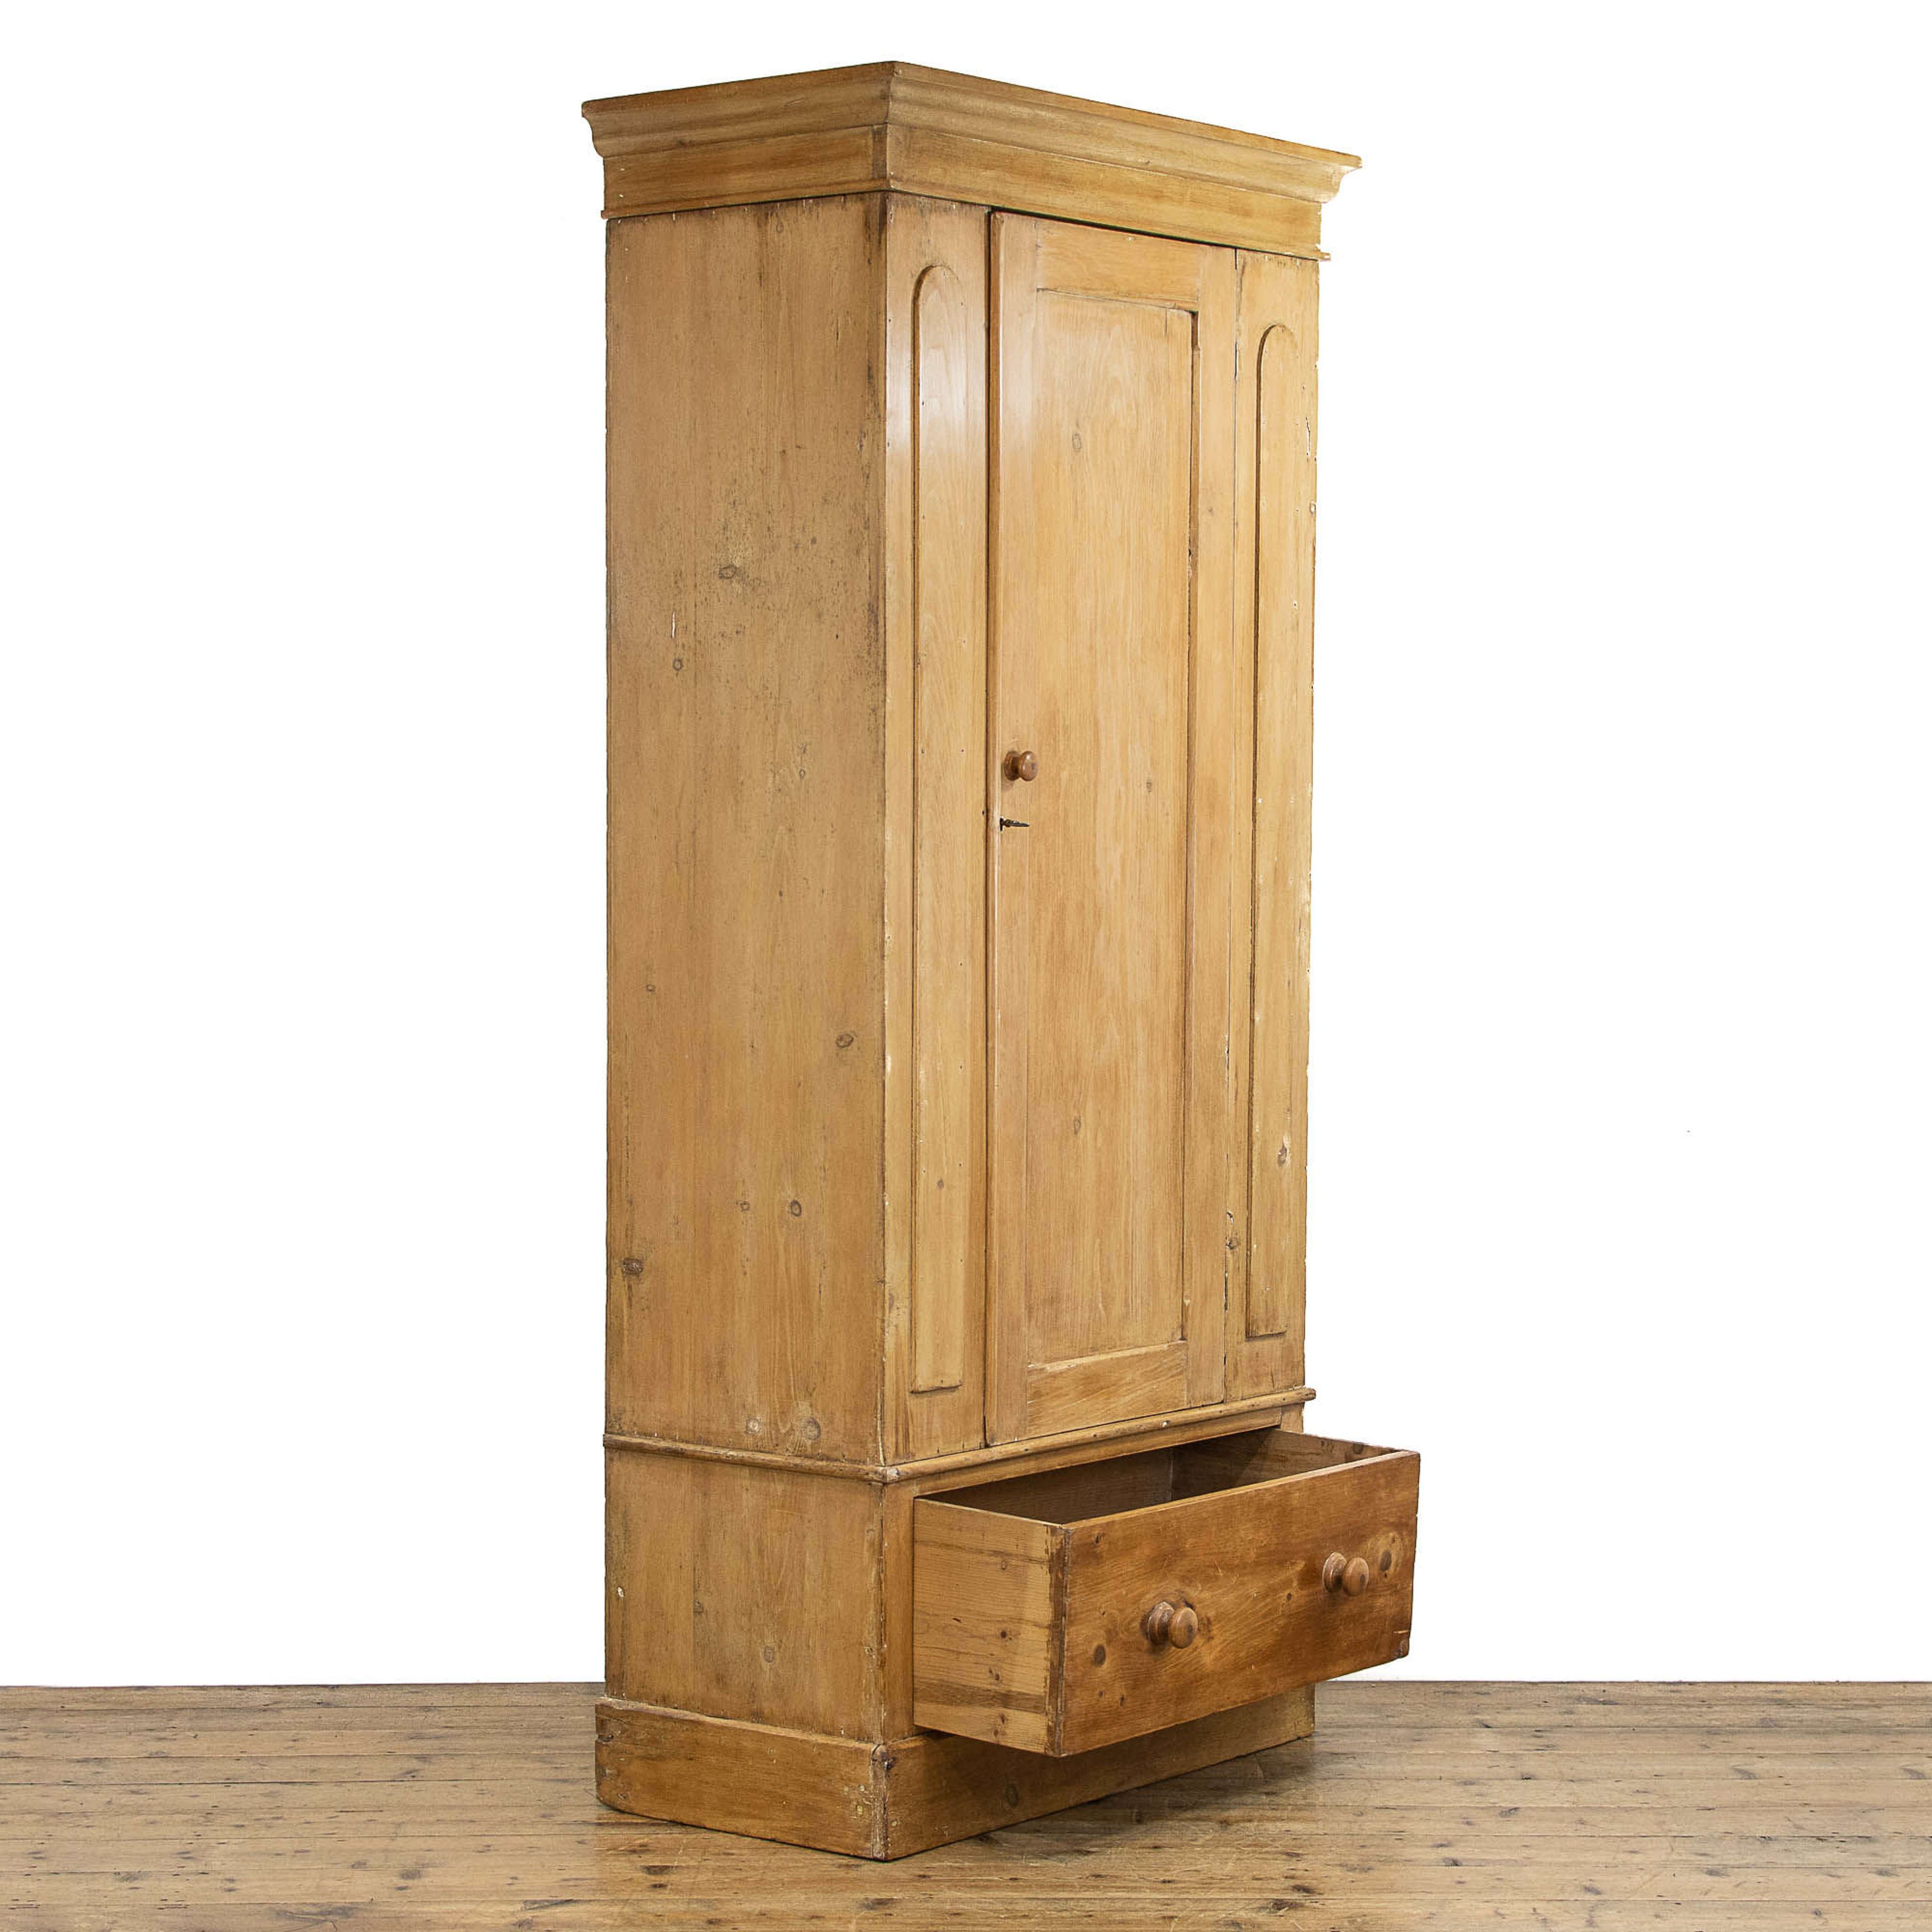 Victorian Stripped Pine Single Wardrobe In Antique Wardrobes & Armoires With Victorian Pine Wardrobes (View 5 of 15)